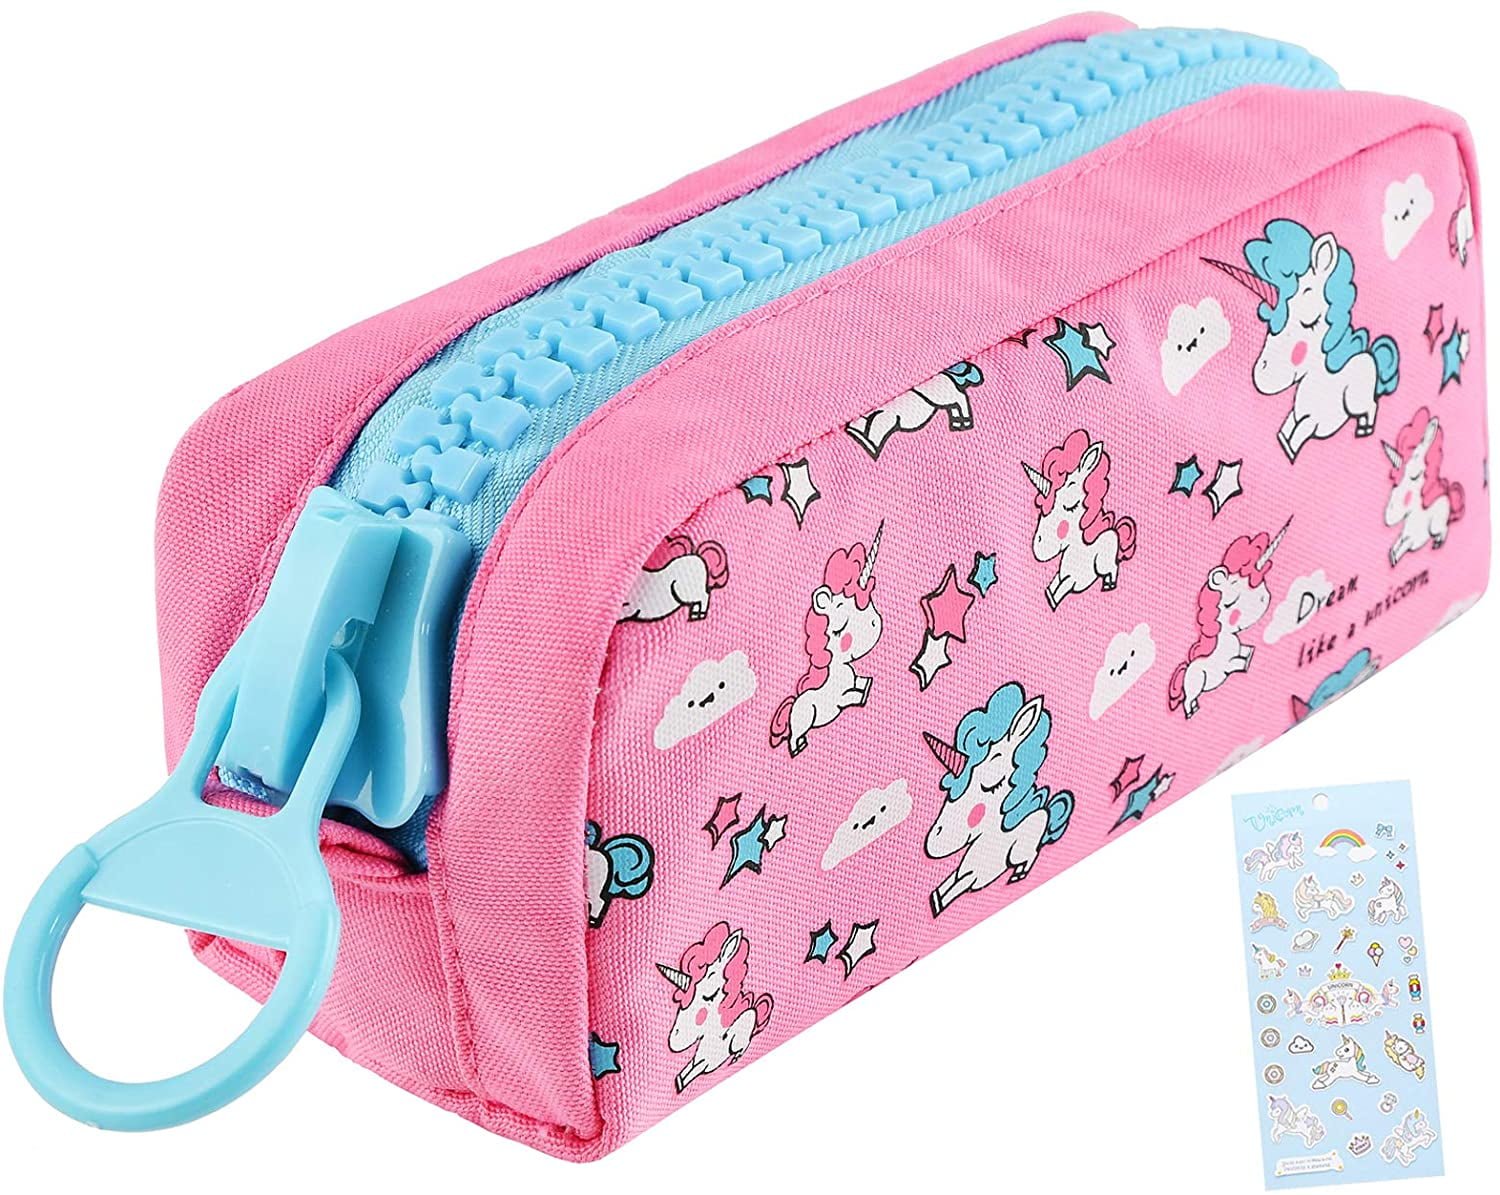 Cambond Pencil Case for Girls - Large Capacity Multi-slot Kids Pencil Pouch  Holder for School, Durable Cute Pencil Box for Girls Kids, Pink Unicorns